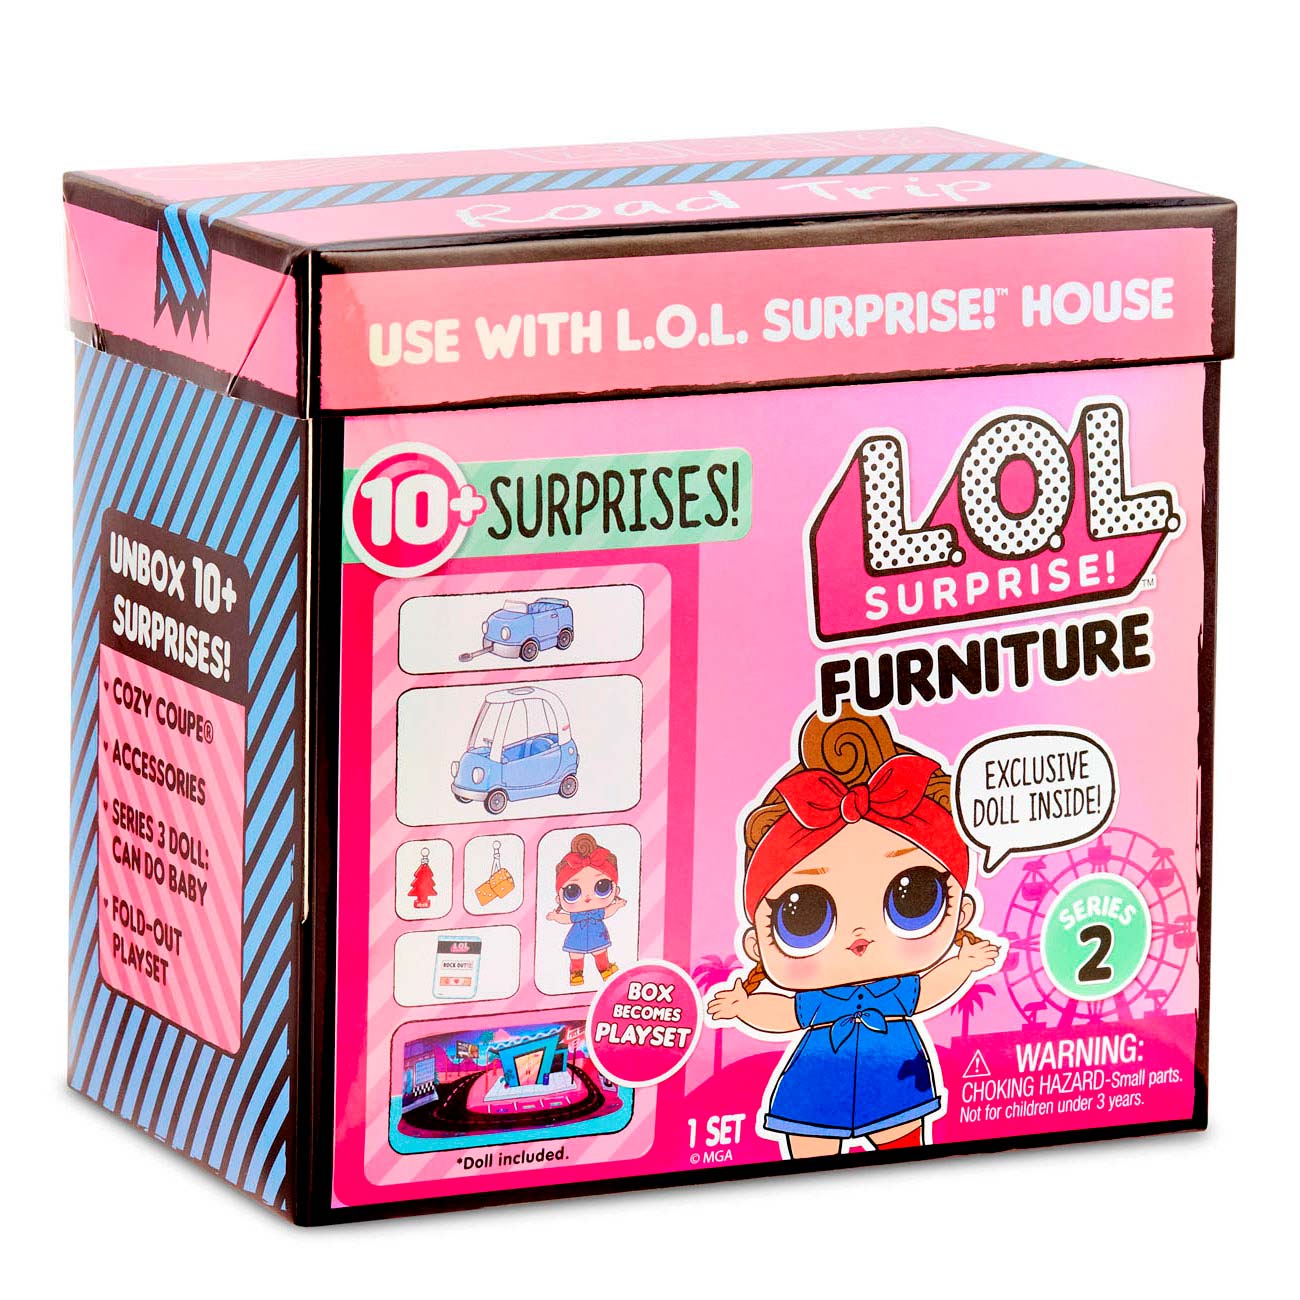 L.O.L. Surprise Furniture - Road Trip met Can Do Baby